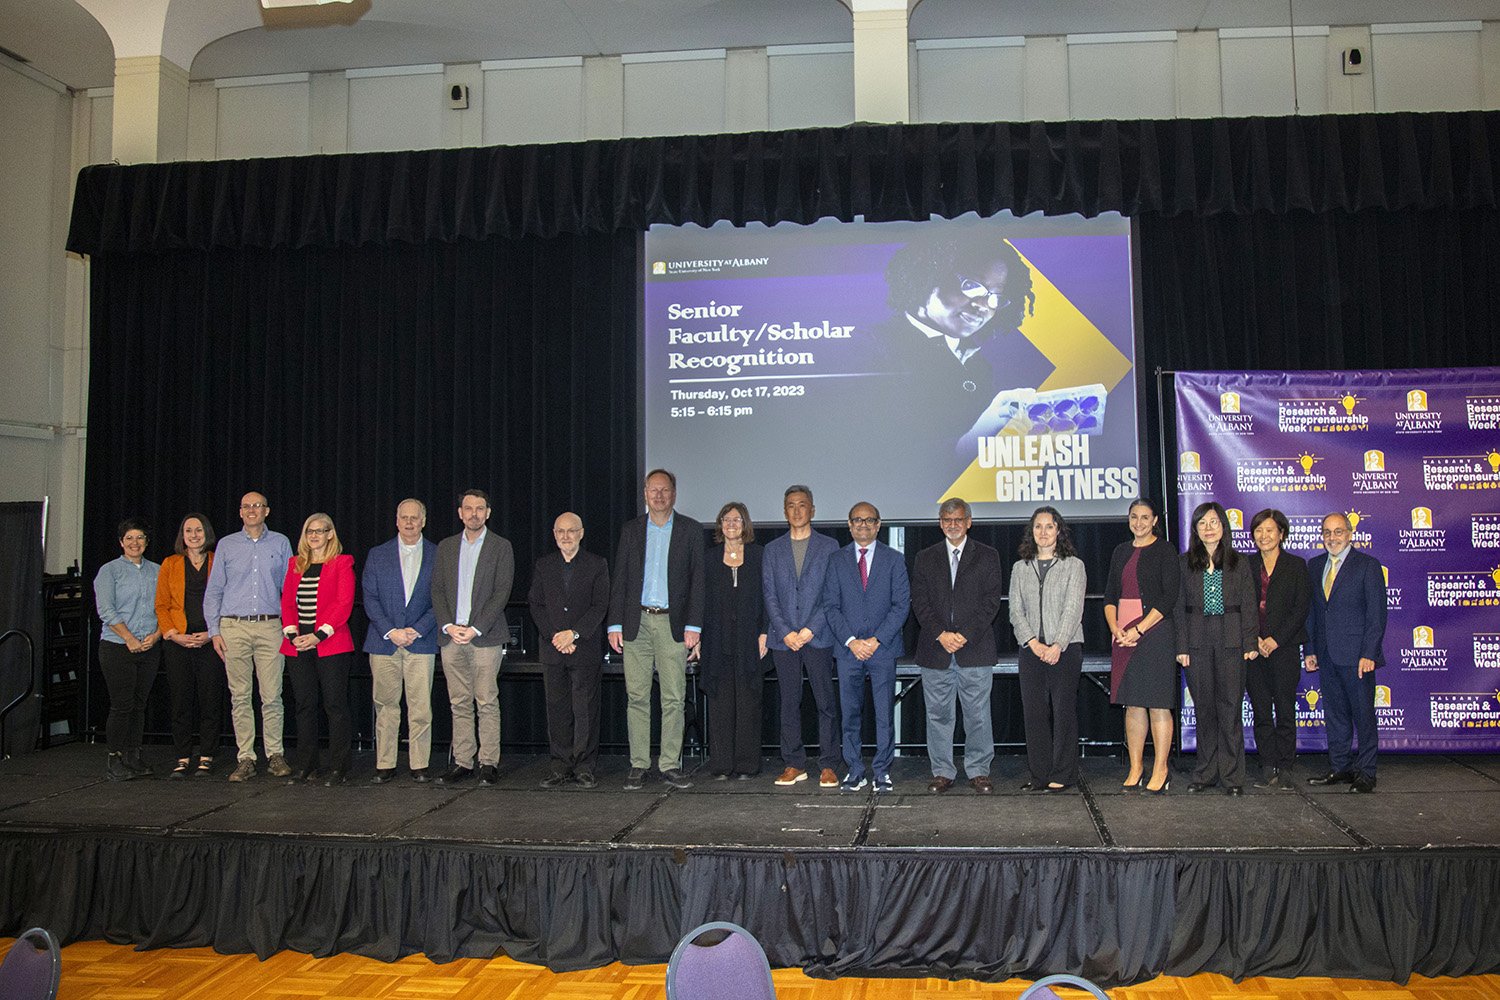 Award winners at the Research Showcase at UAlbany at ETEC. (Photo by Patrick Dodson)